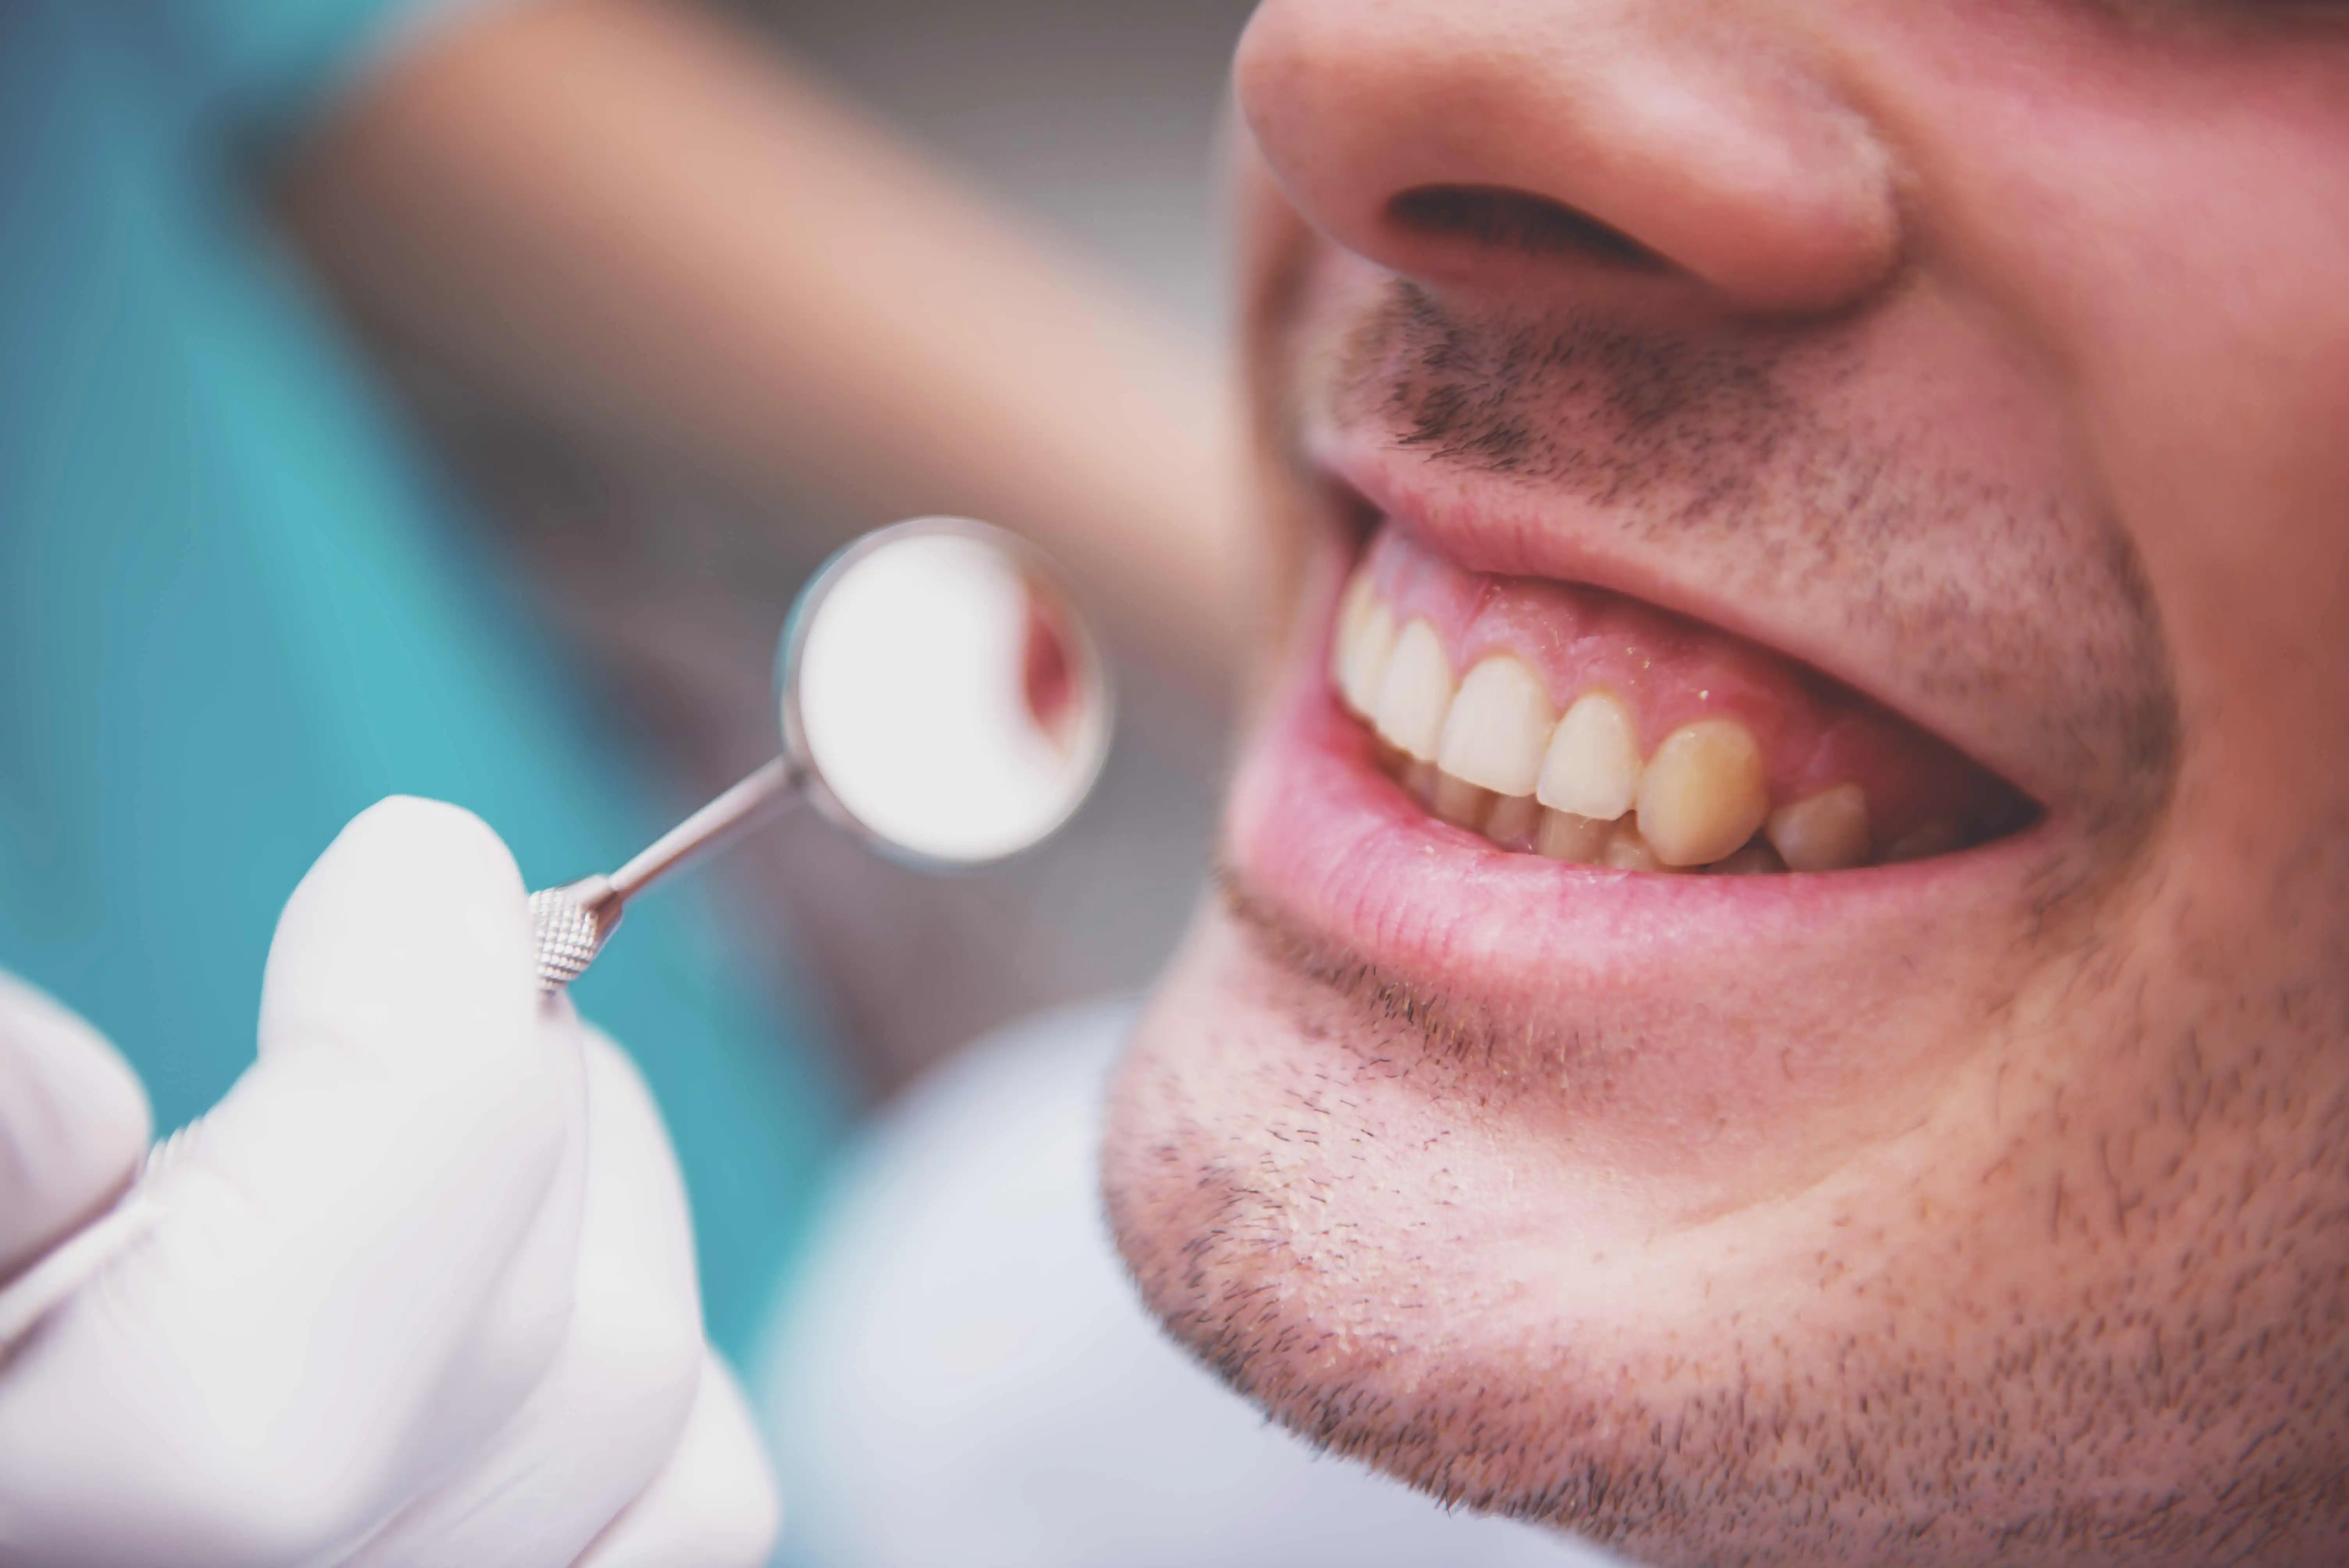 Teeth Stains: Causes, Types, and How to Remove Them